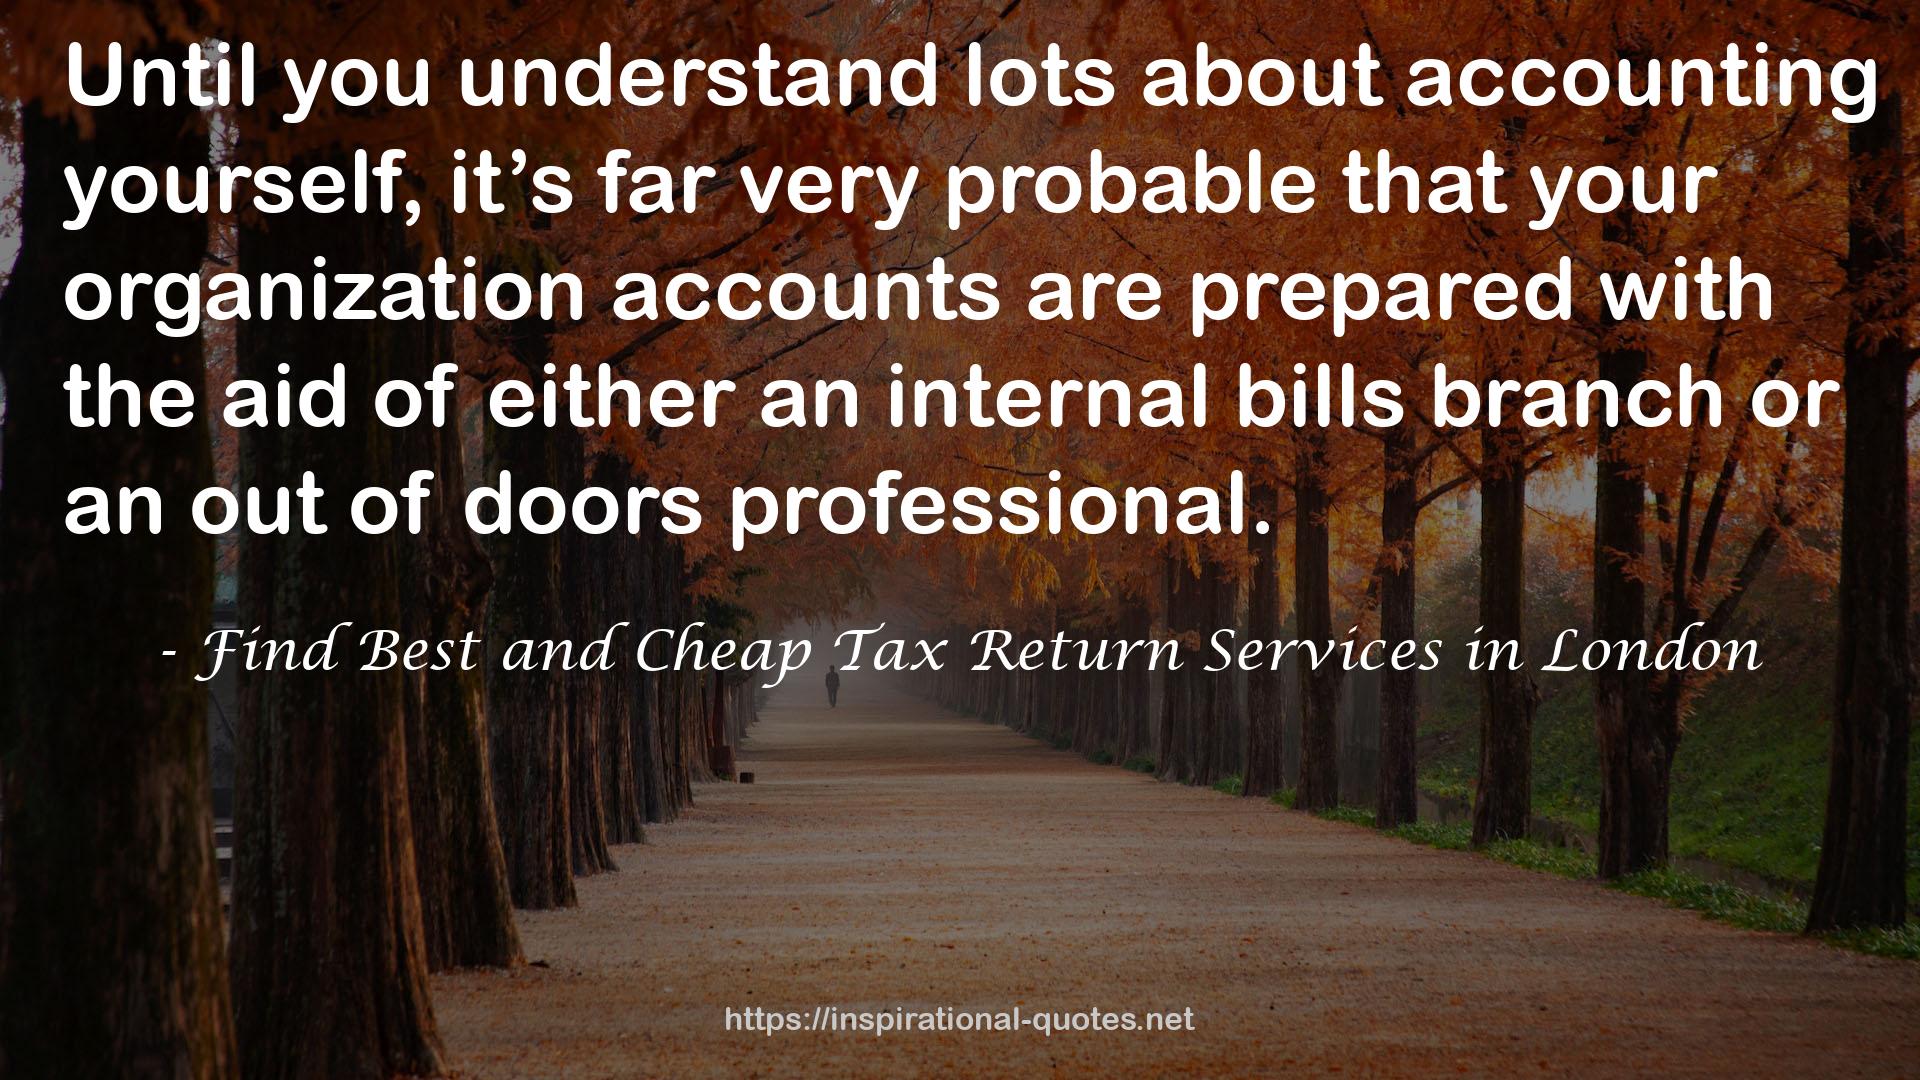 Find Best and Cheap Tax Return Services in London QUOTES